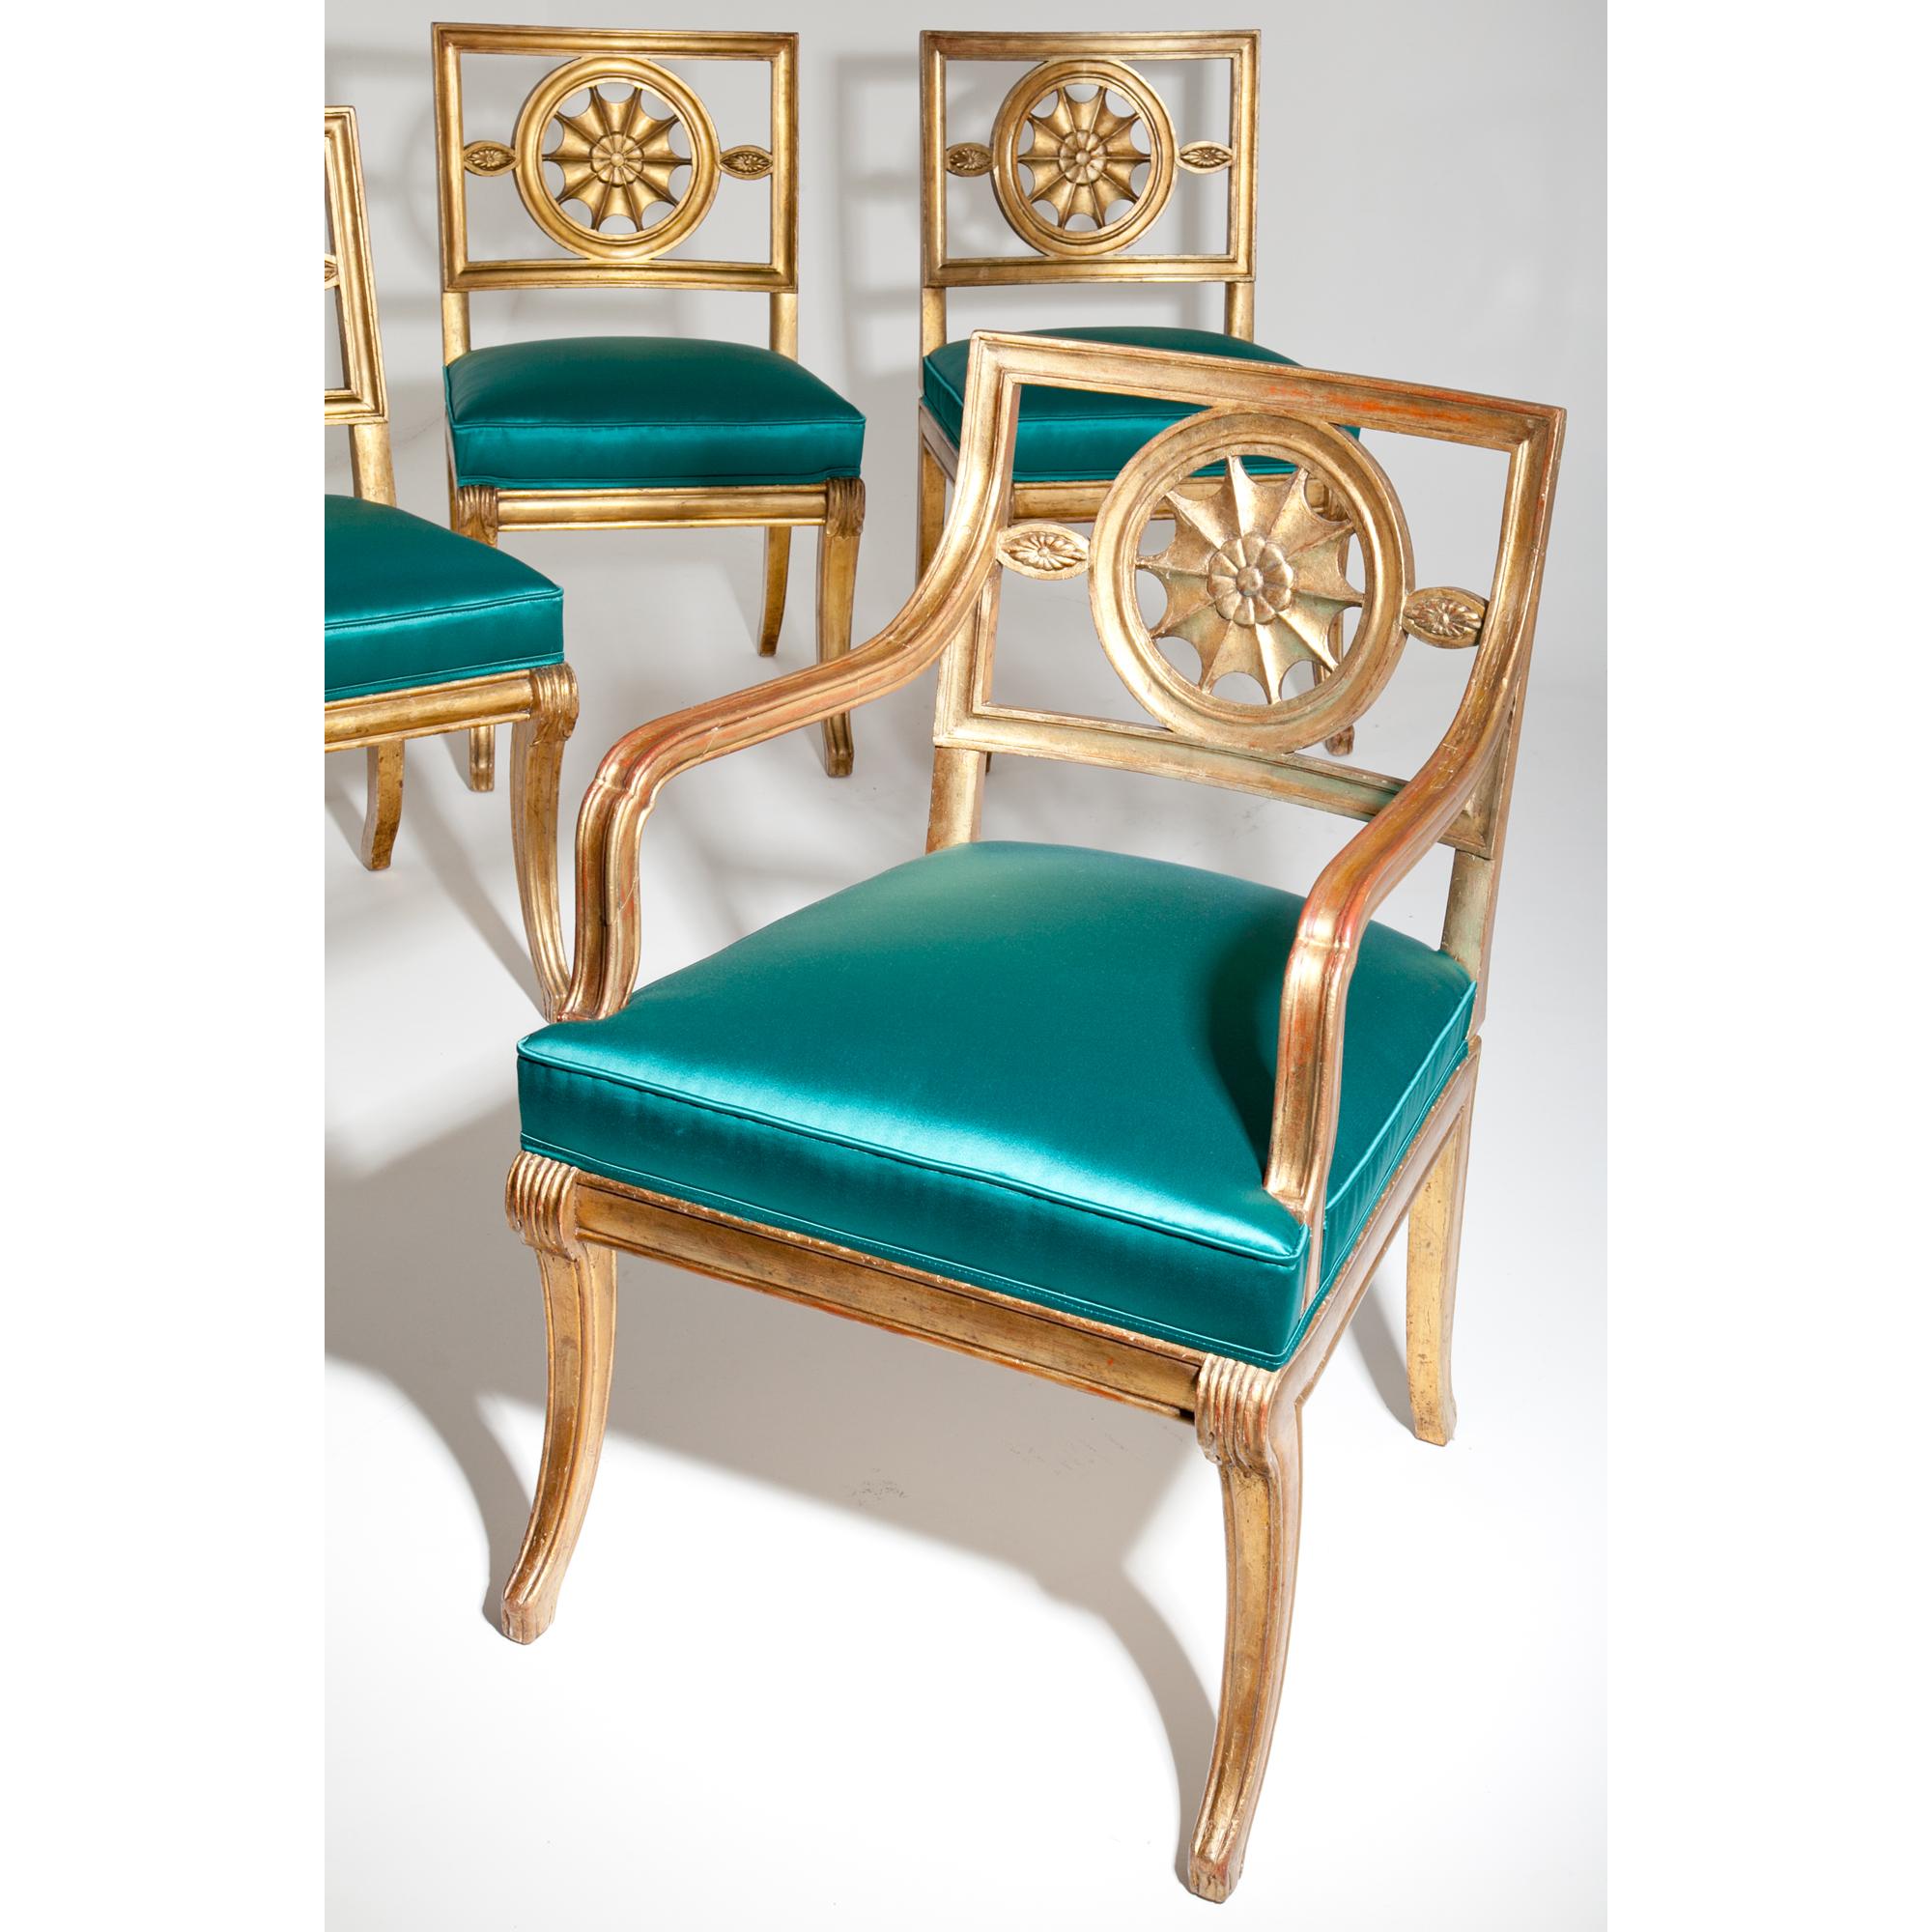 Neoclassical Chairs, Berlin First Half of the 19th Century 8